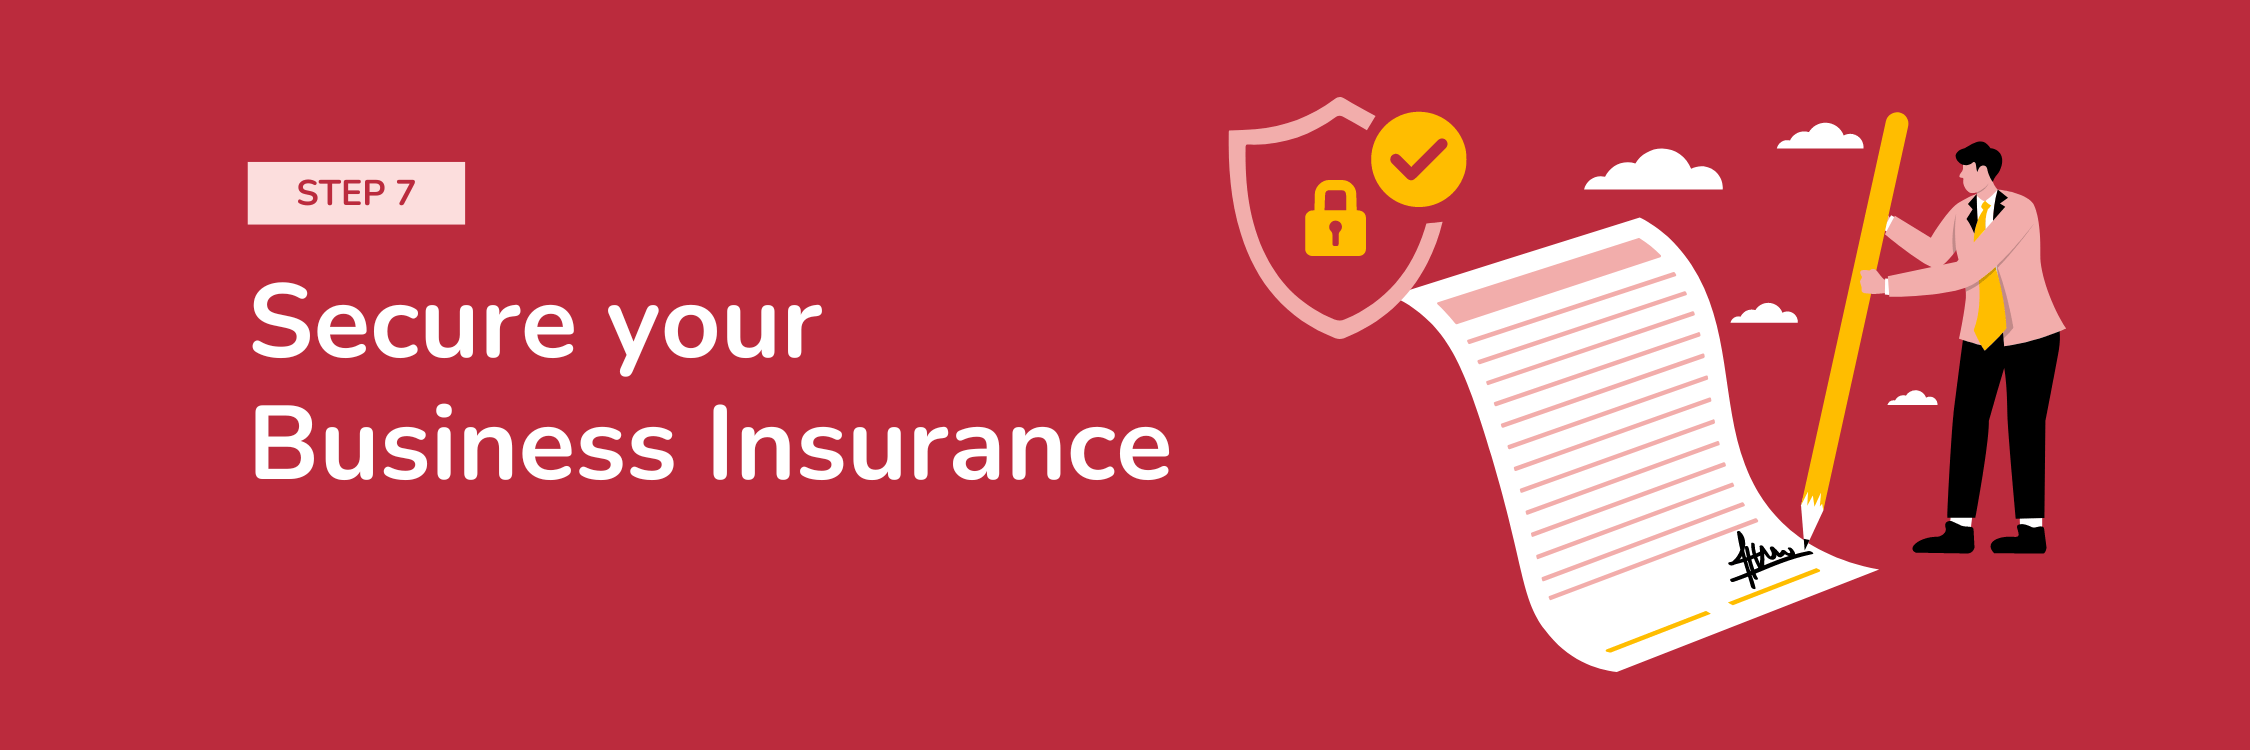 Step 7: Secure Your Business Insurance